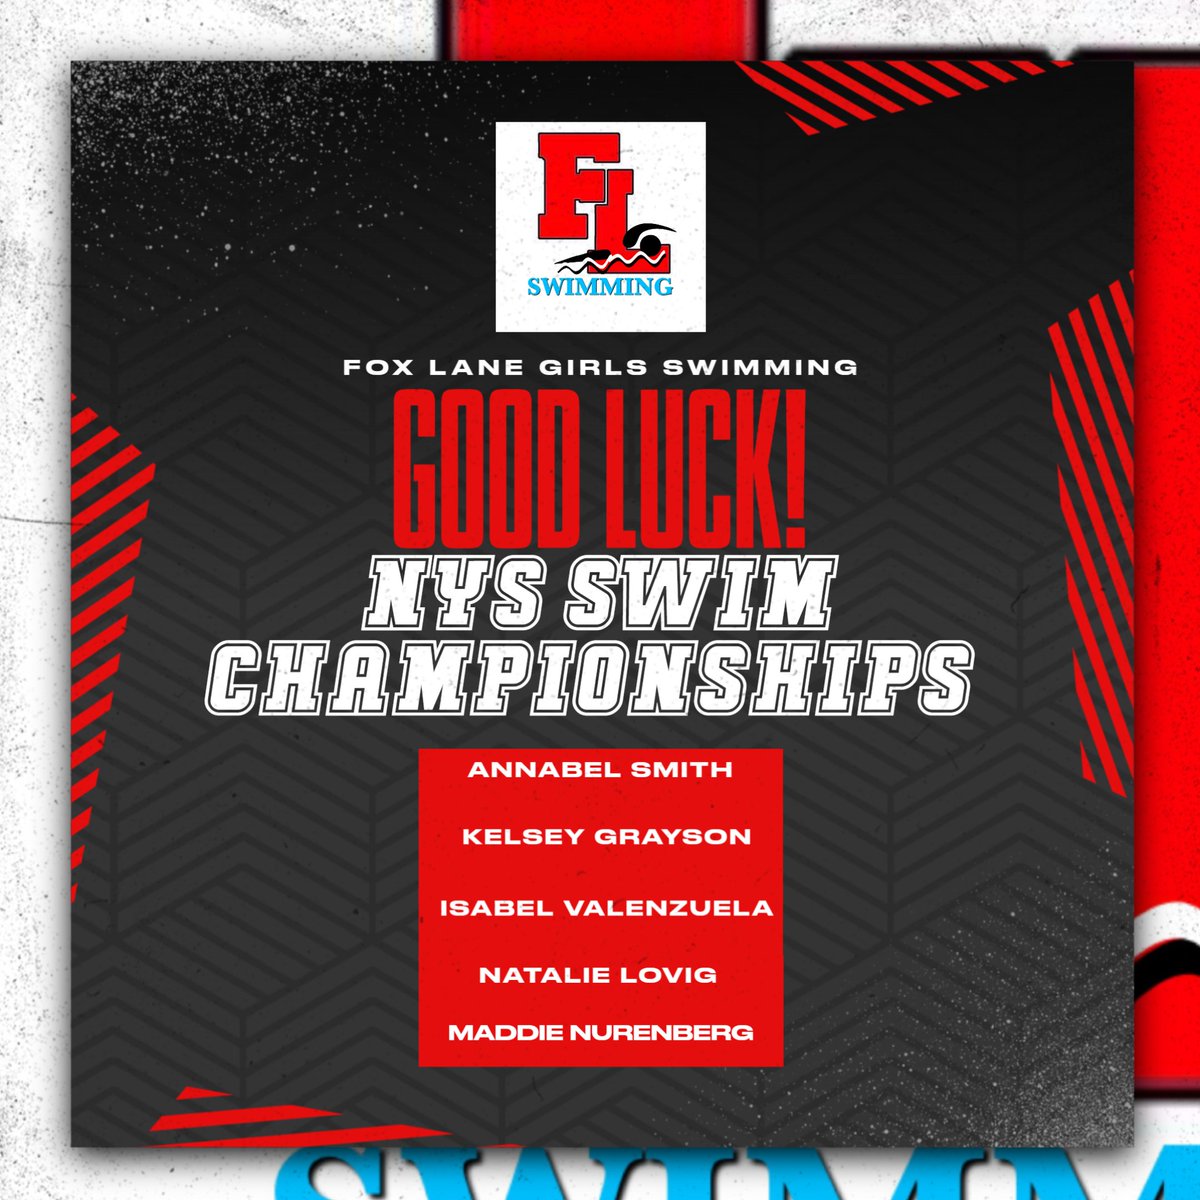 Good Luck to our swimmers this weekend as they compete in the NYS Swim Championships! Foxes Up!!